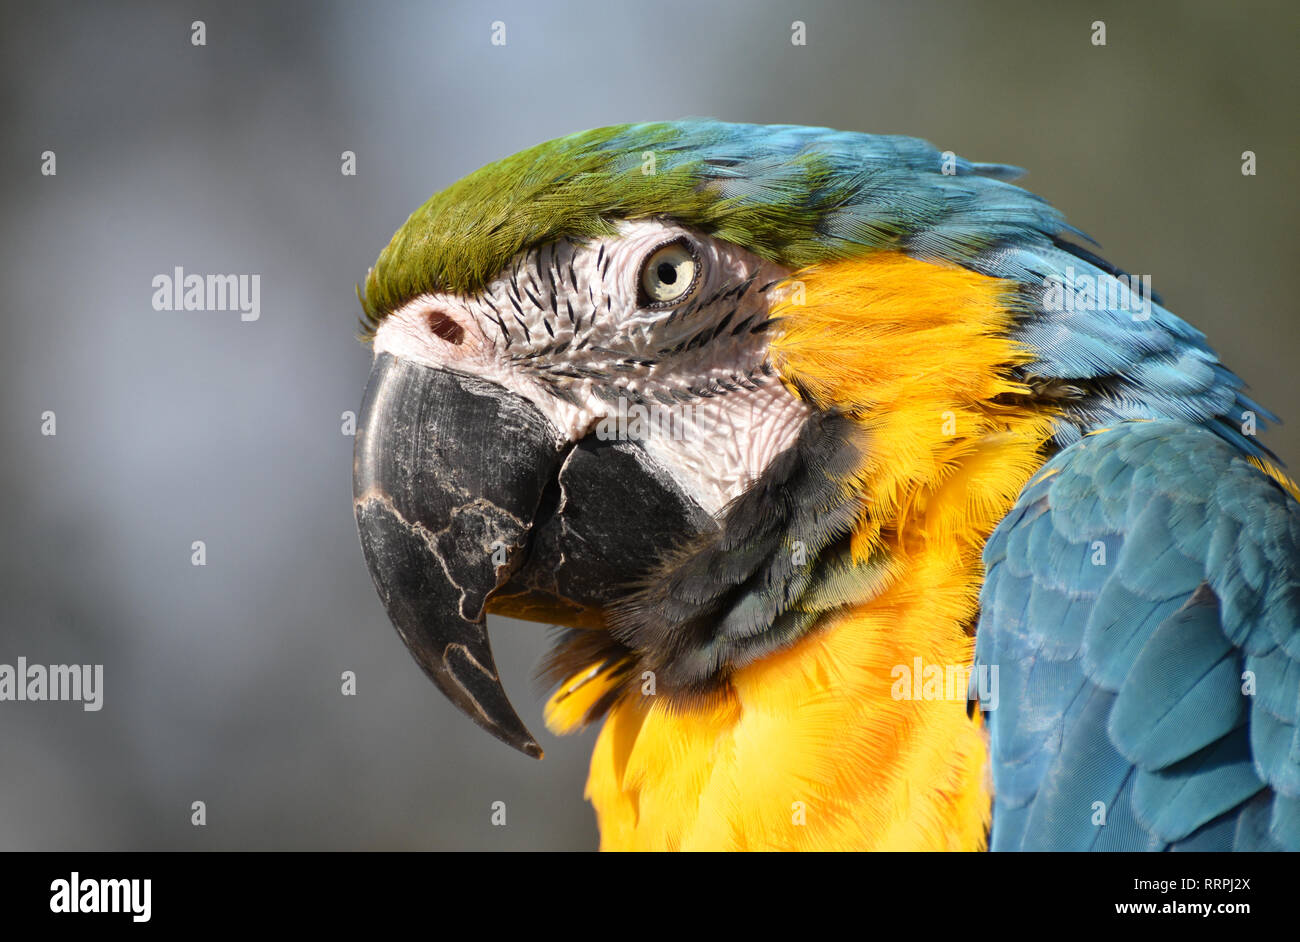 Blue and Gold Macaw Parrot / Banque D'Images